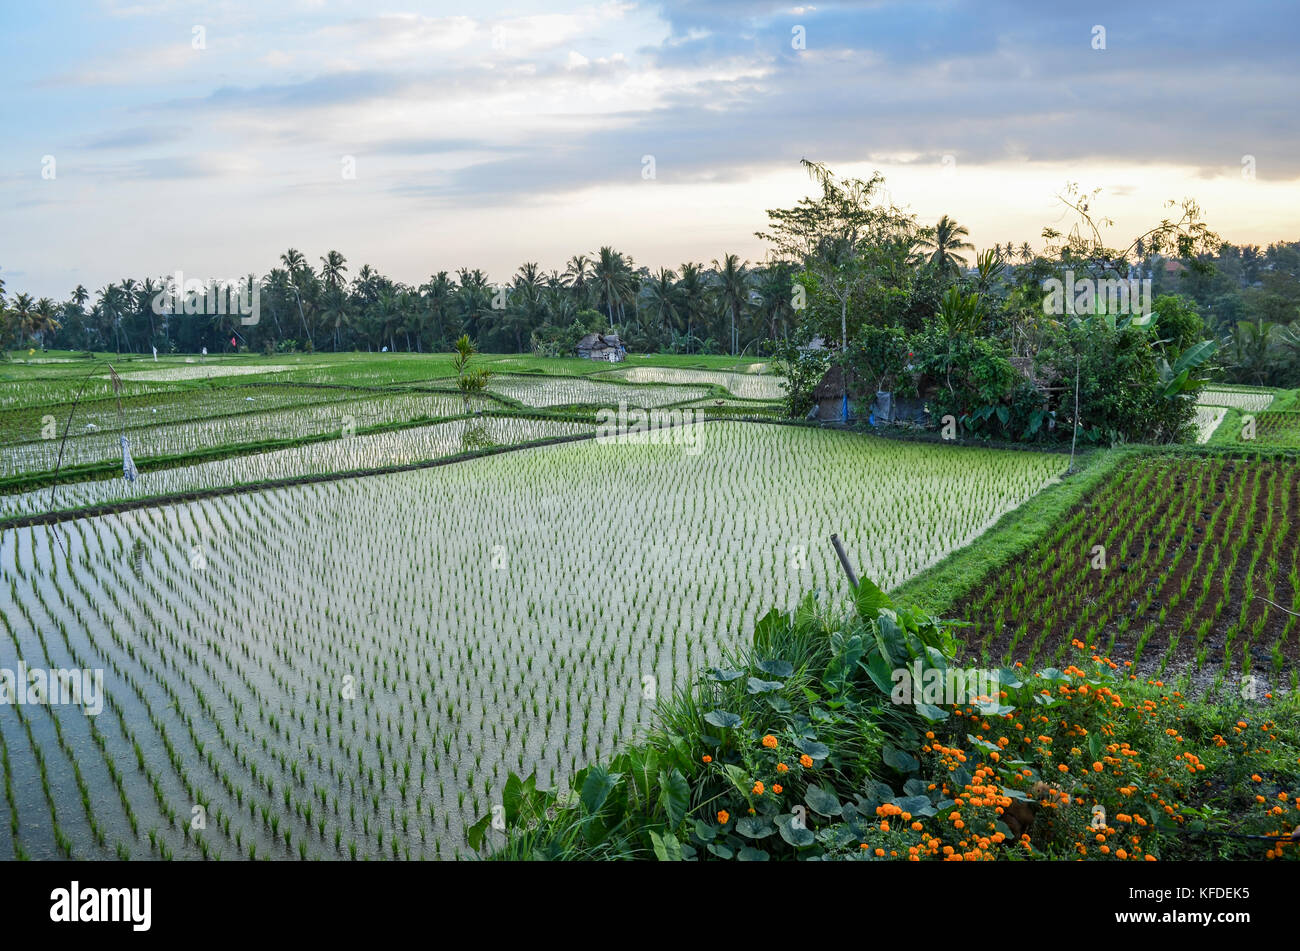 The landscape of paddy fields and dividing mud walls, with small green rice plants growing in shallow water. Stock Photo